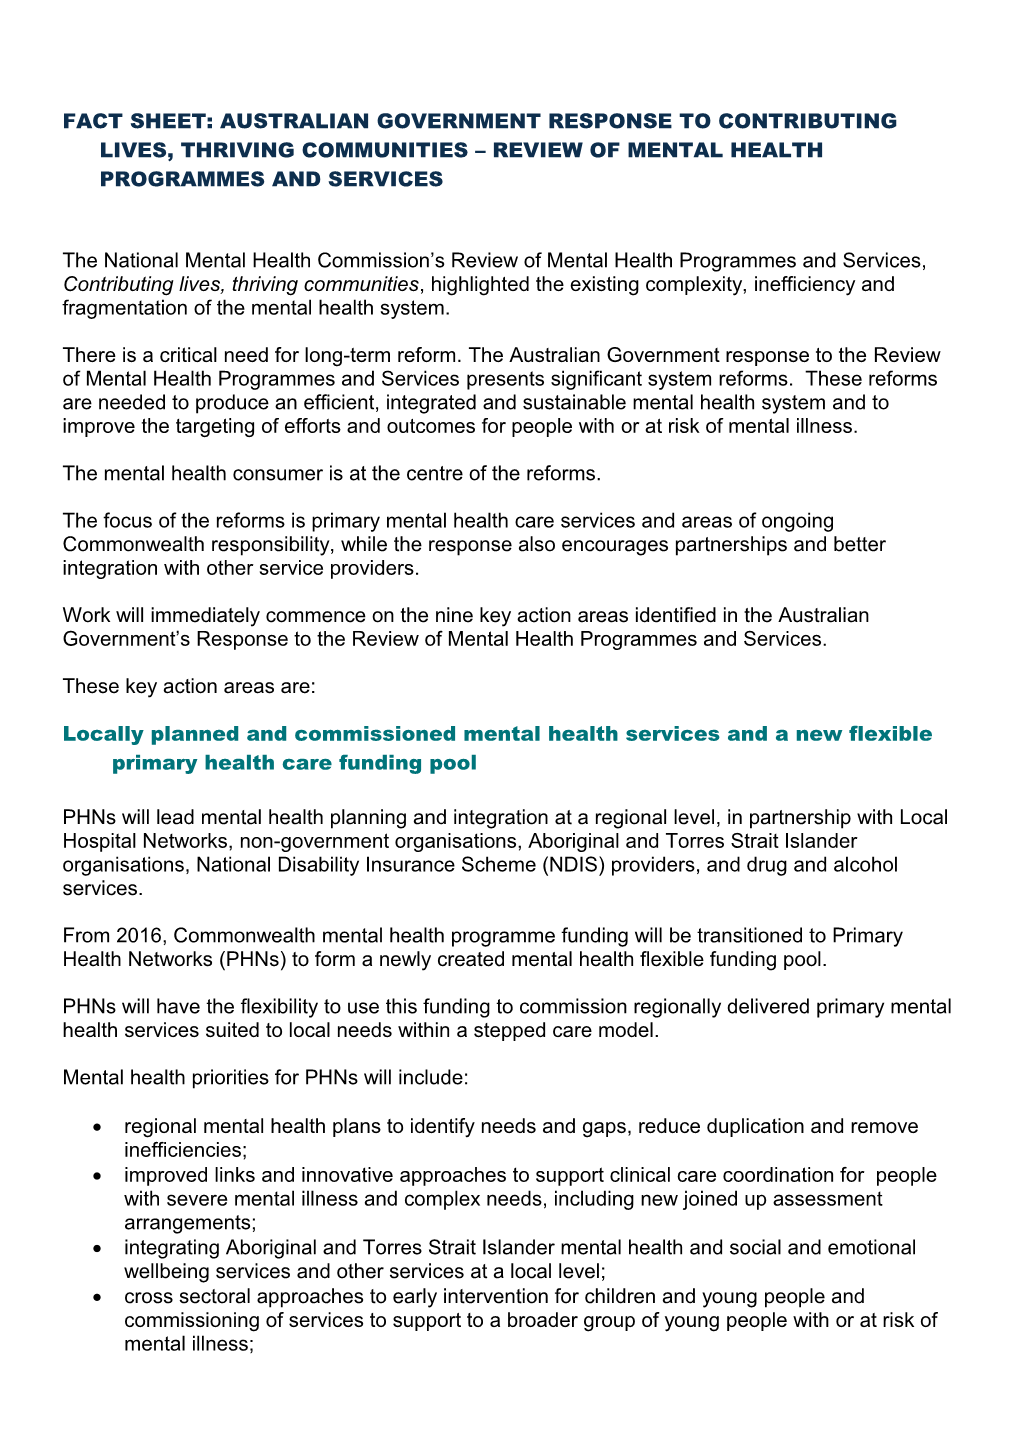 Fact Sheet: Australian Government Response to Contributing Lives, Thriving Communities